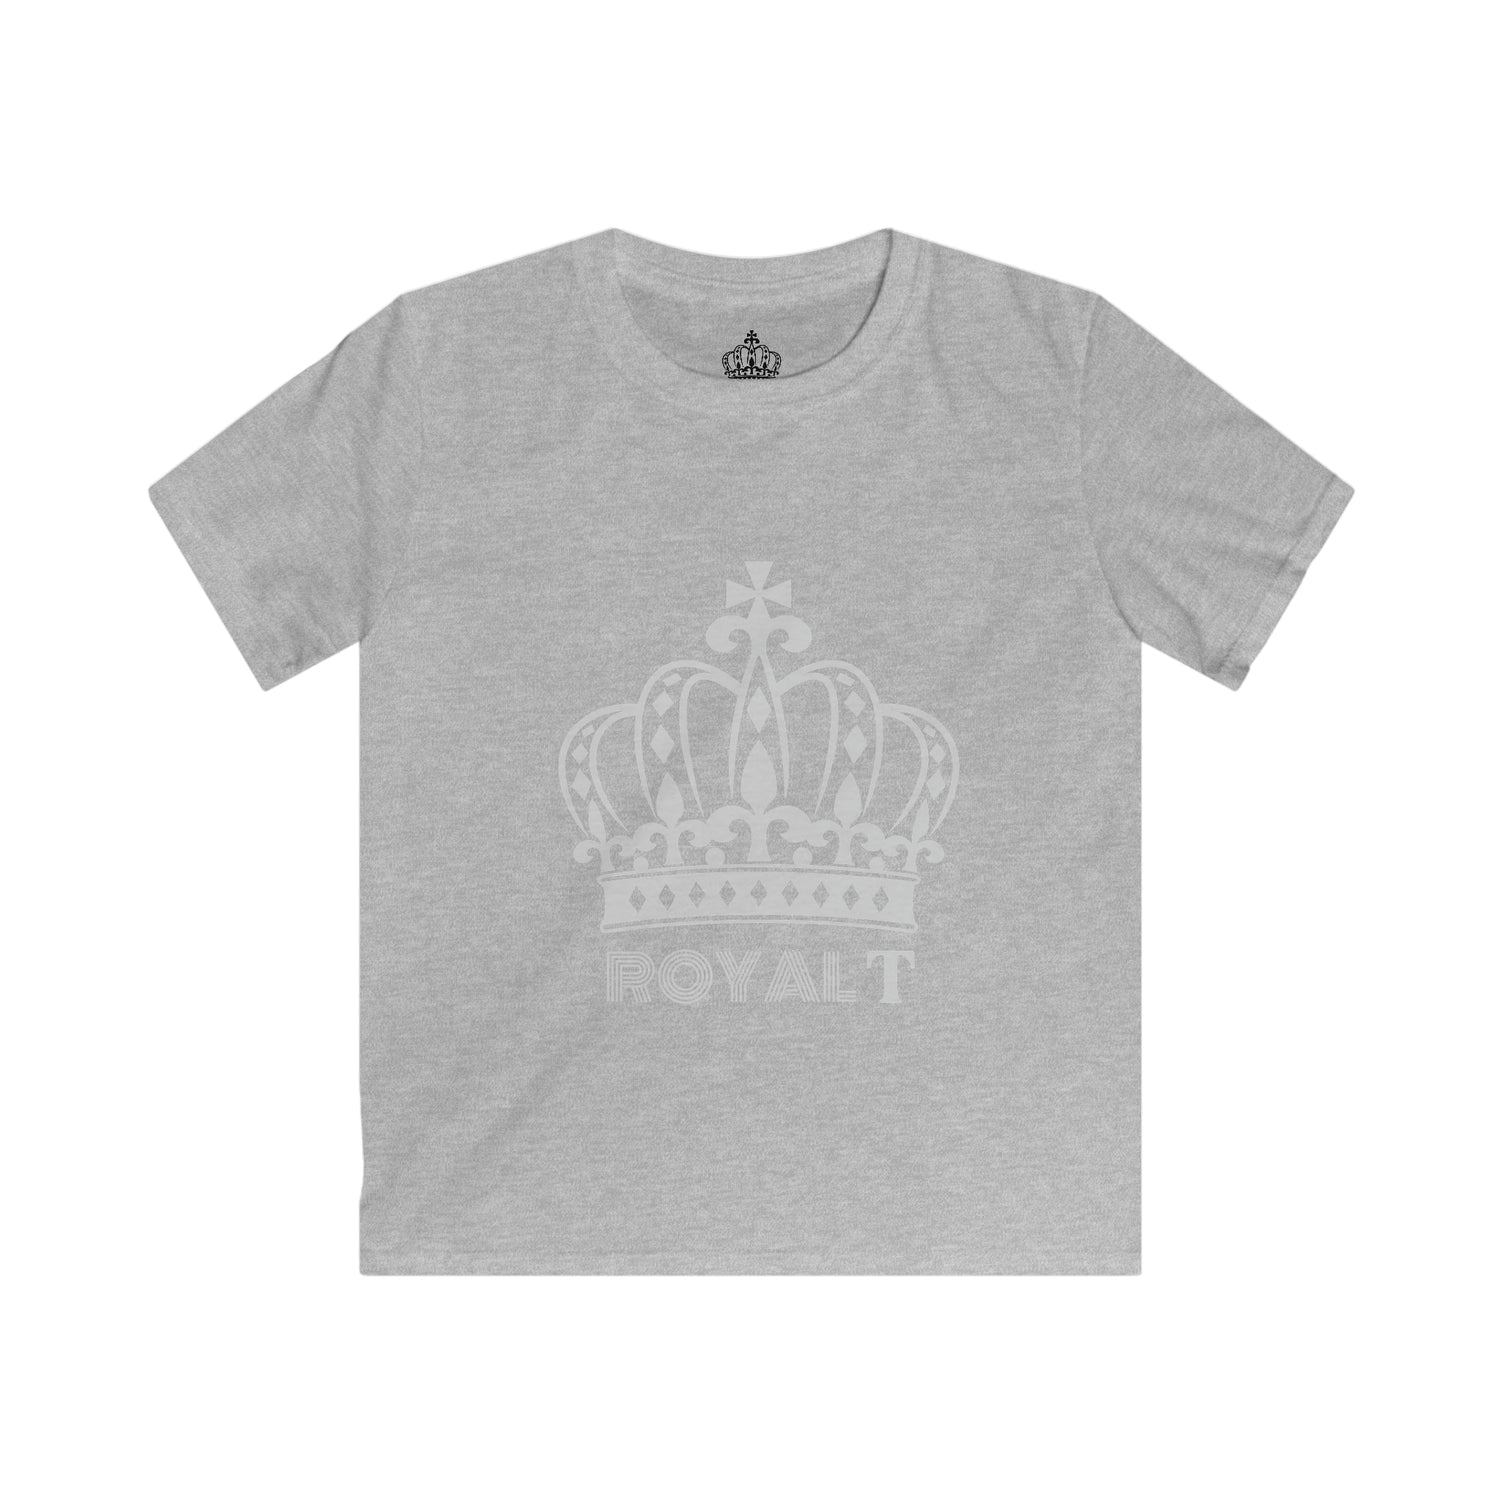 Childrens Softstyle T Shirts - Royal T